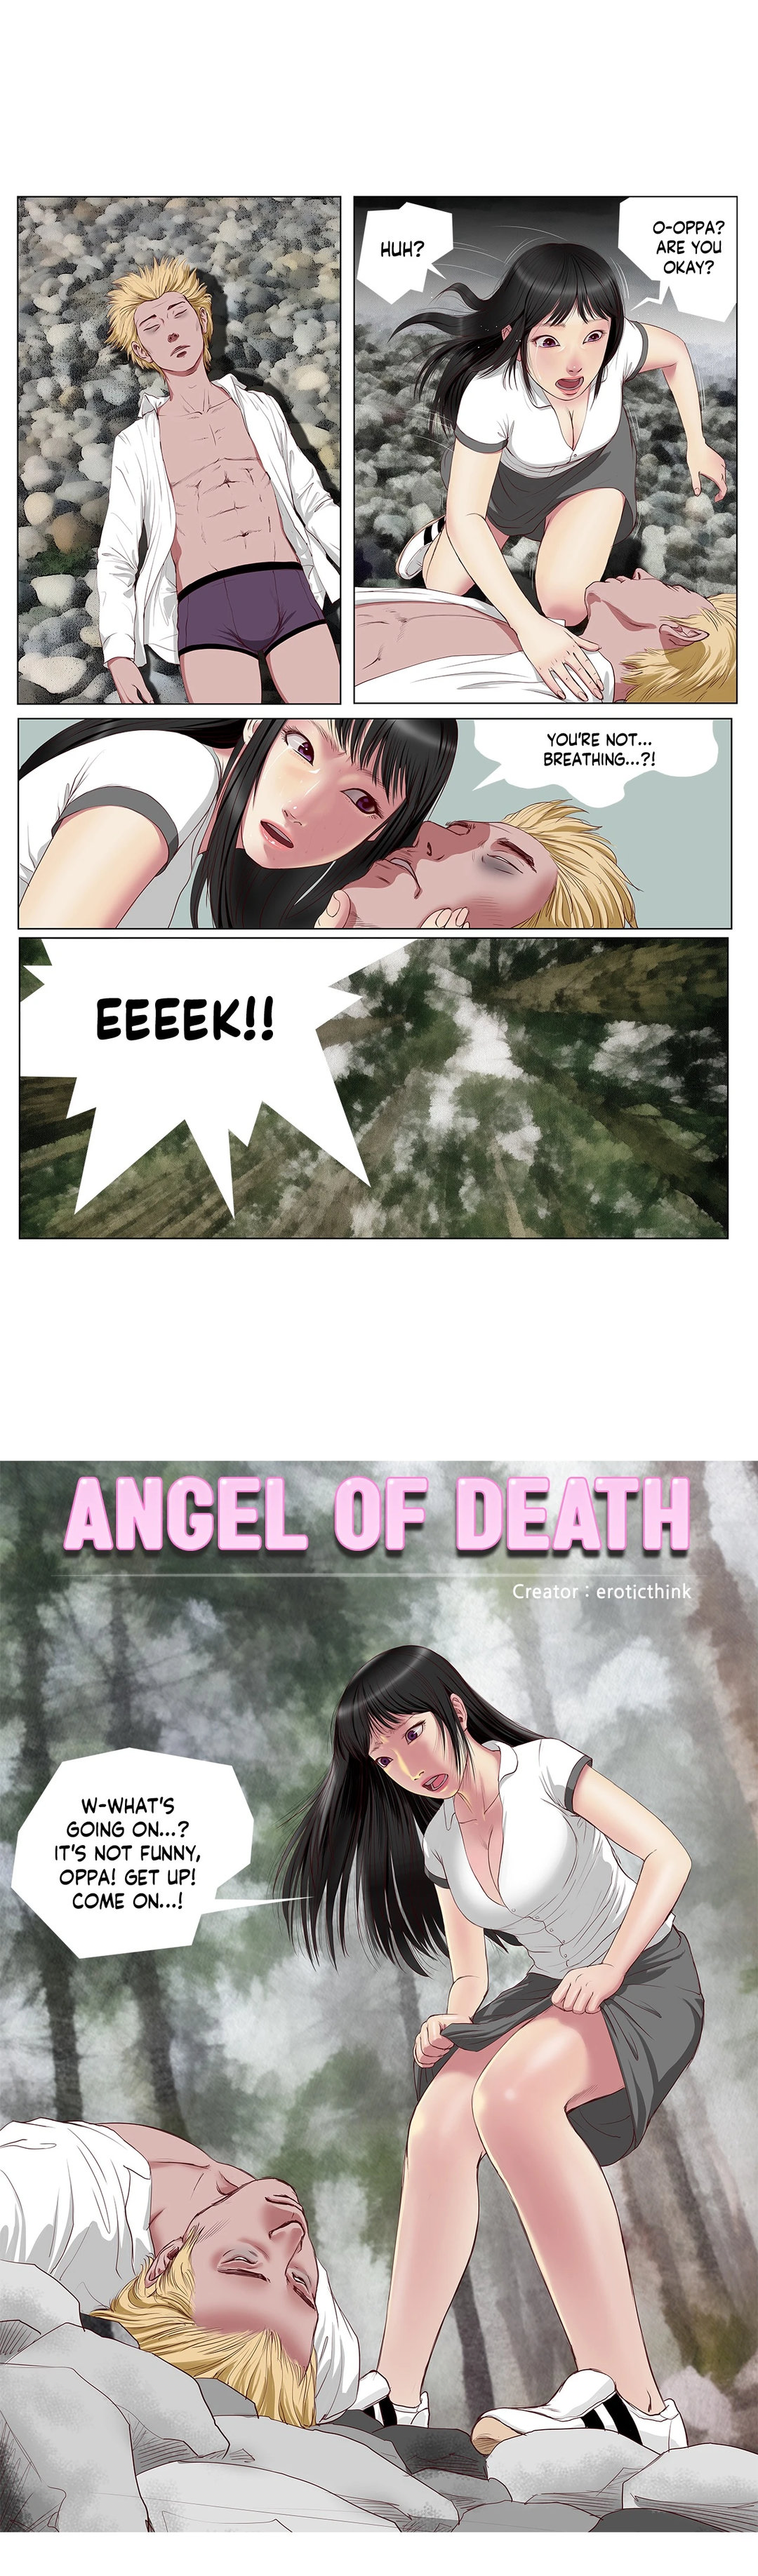 Death Angel - Chapter 4 Page 4